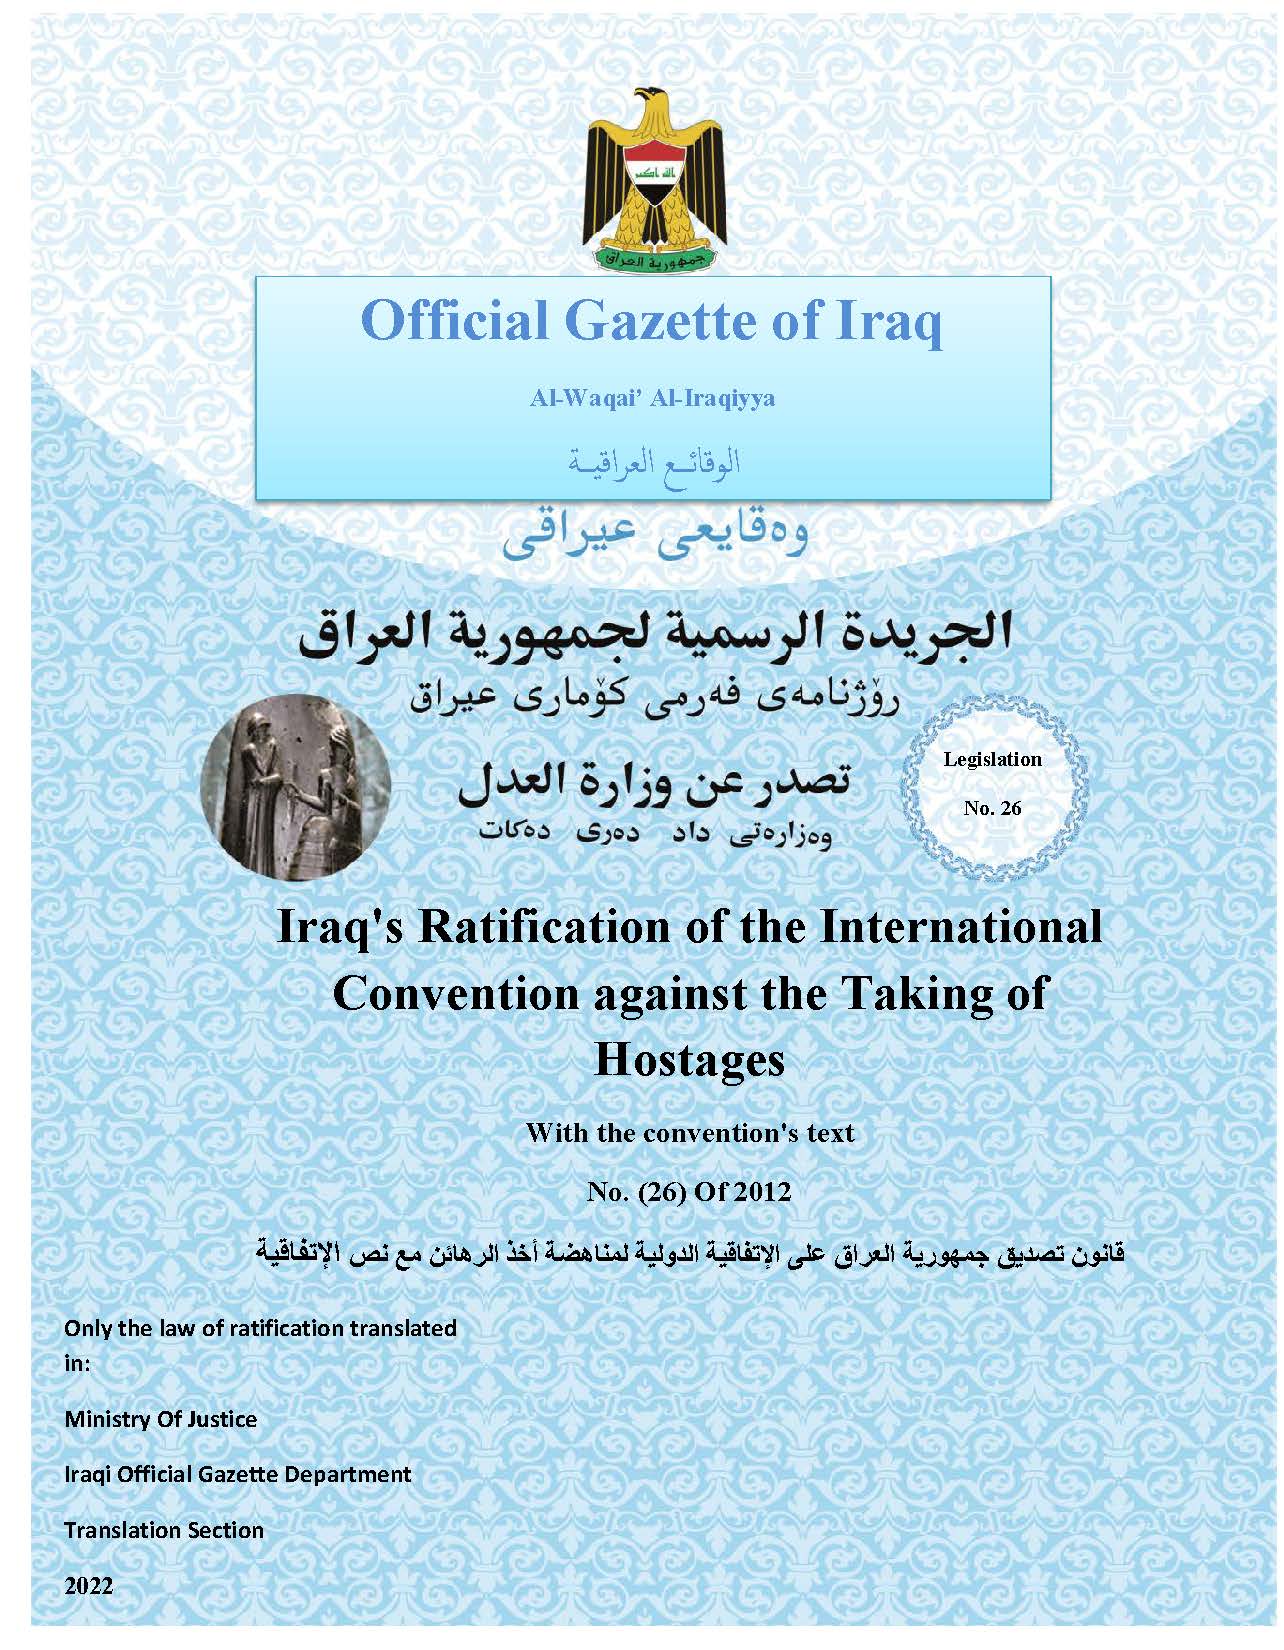 Iraq's Ratification of the International Convention against the Taking of Hostages With the convention's text No.(26) of 2012 